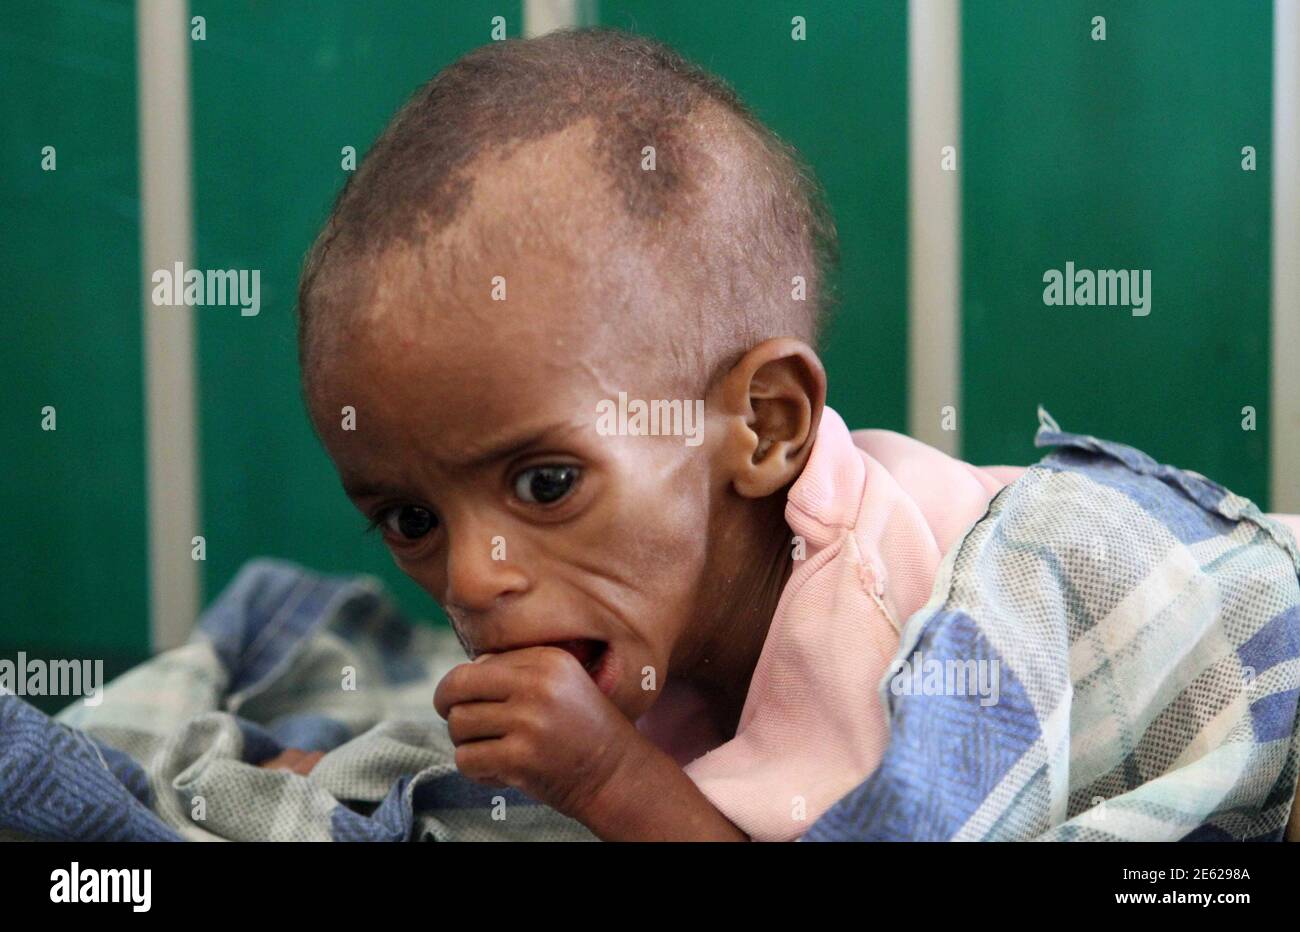 A malnourished Somali child rests inside the paediatric ward at the Banadir hospital in southern Mogadishu, August 3, 2011. The Horn of Africa food crisis shows the need to provide the world's poor with better access to family planning as part of efforts to prevent future tragedies, the head of the United Nations Population Fund (UNFPA) said. REUTERS/Feisal Omar (SOMALIA - Tags: SOCIETY ENVIRONMENT DISASTER) Stock Photo